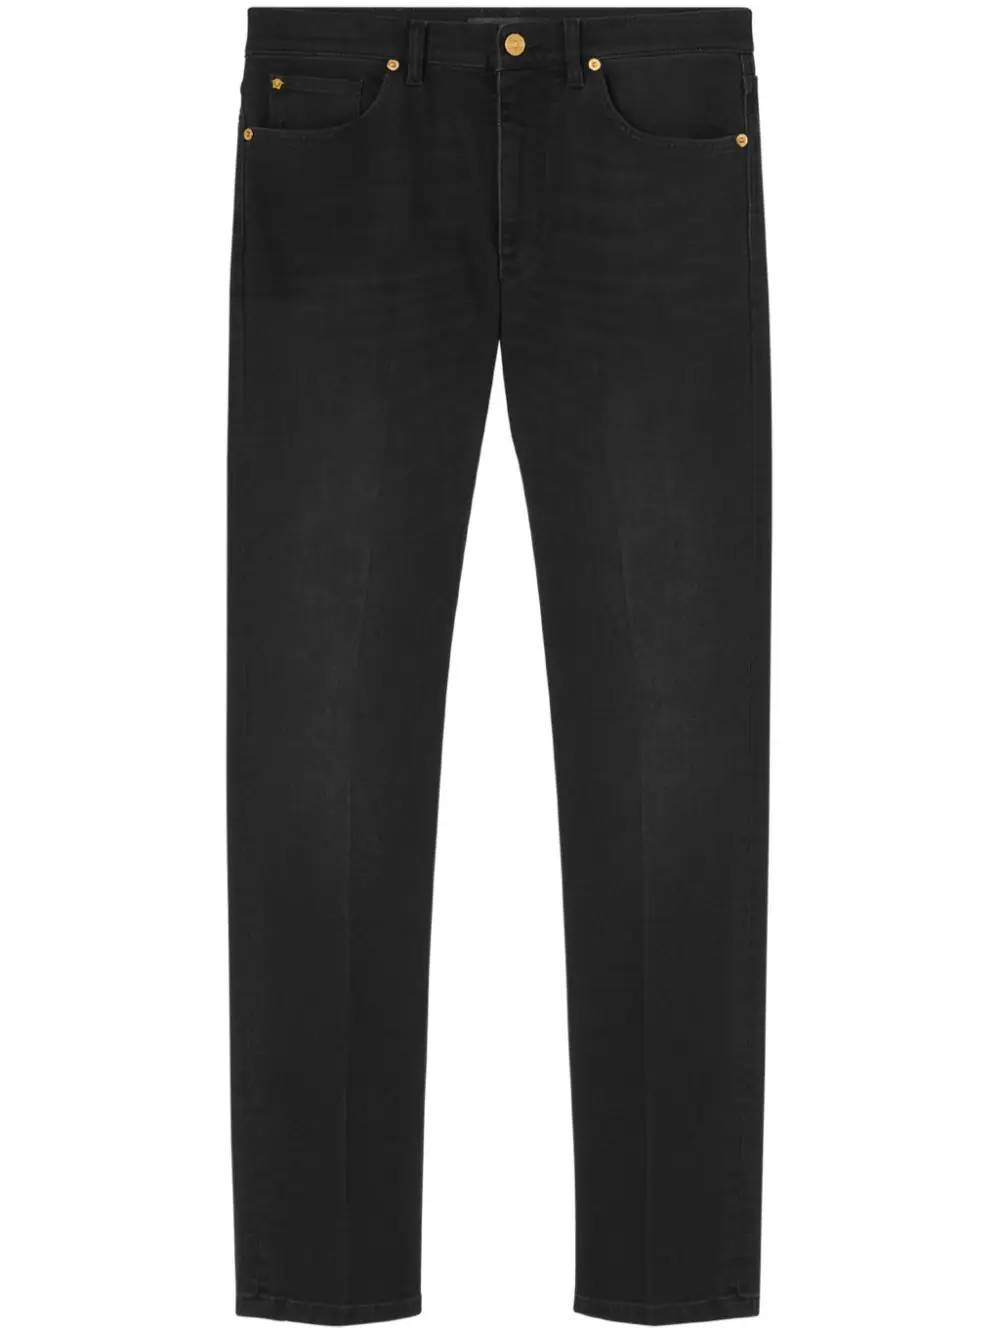 Versace 1013886 Man Faded Washed Black Jeans - Zuklat